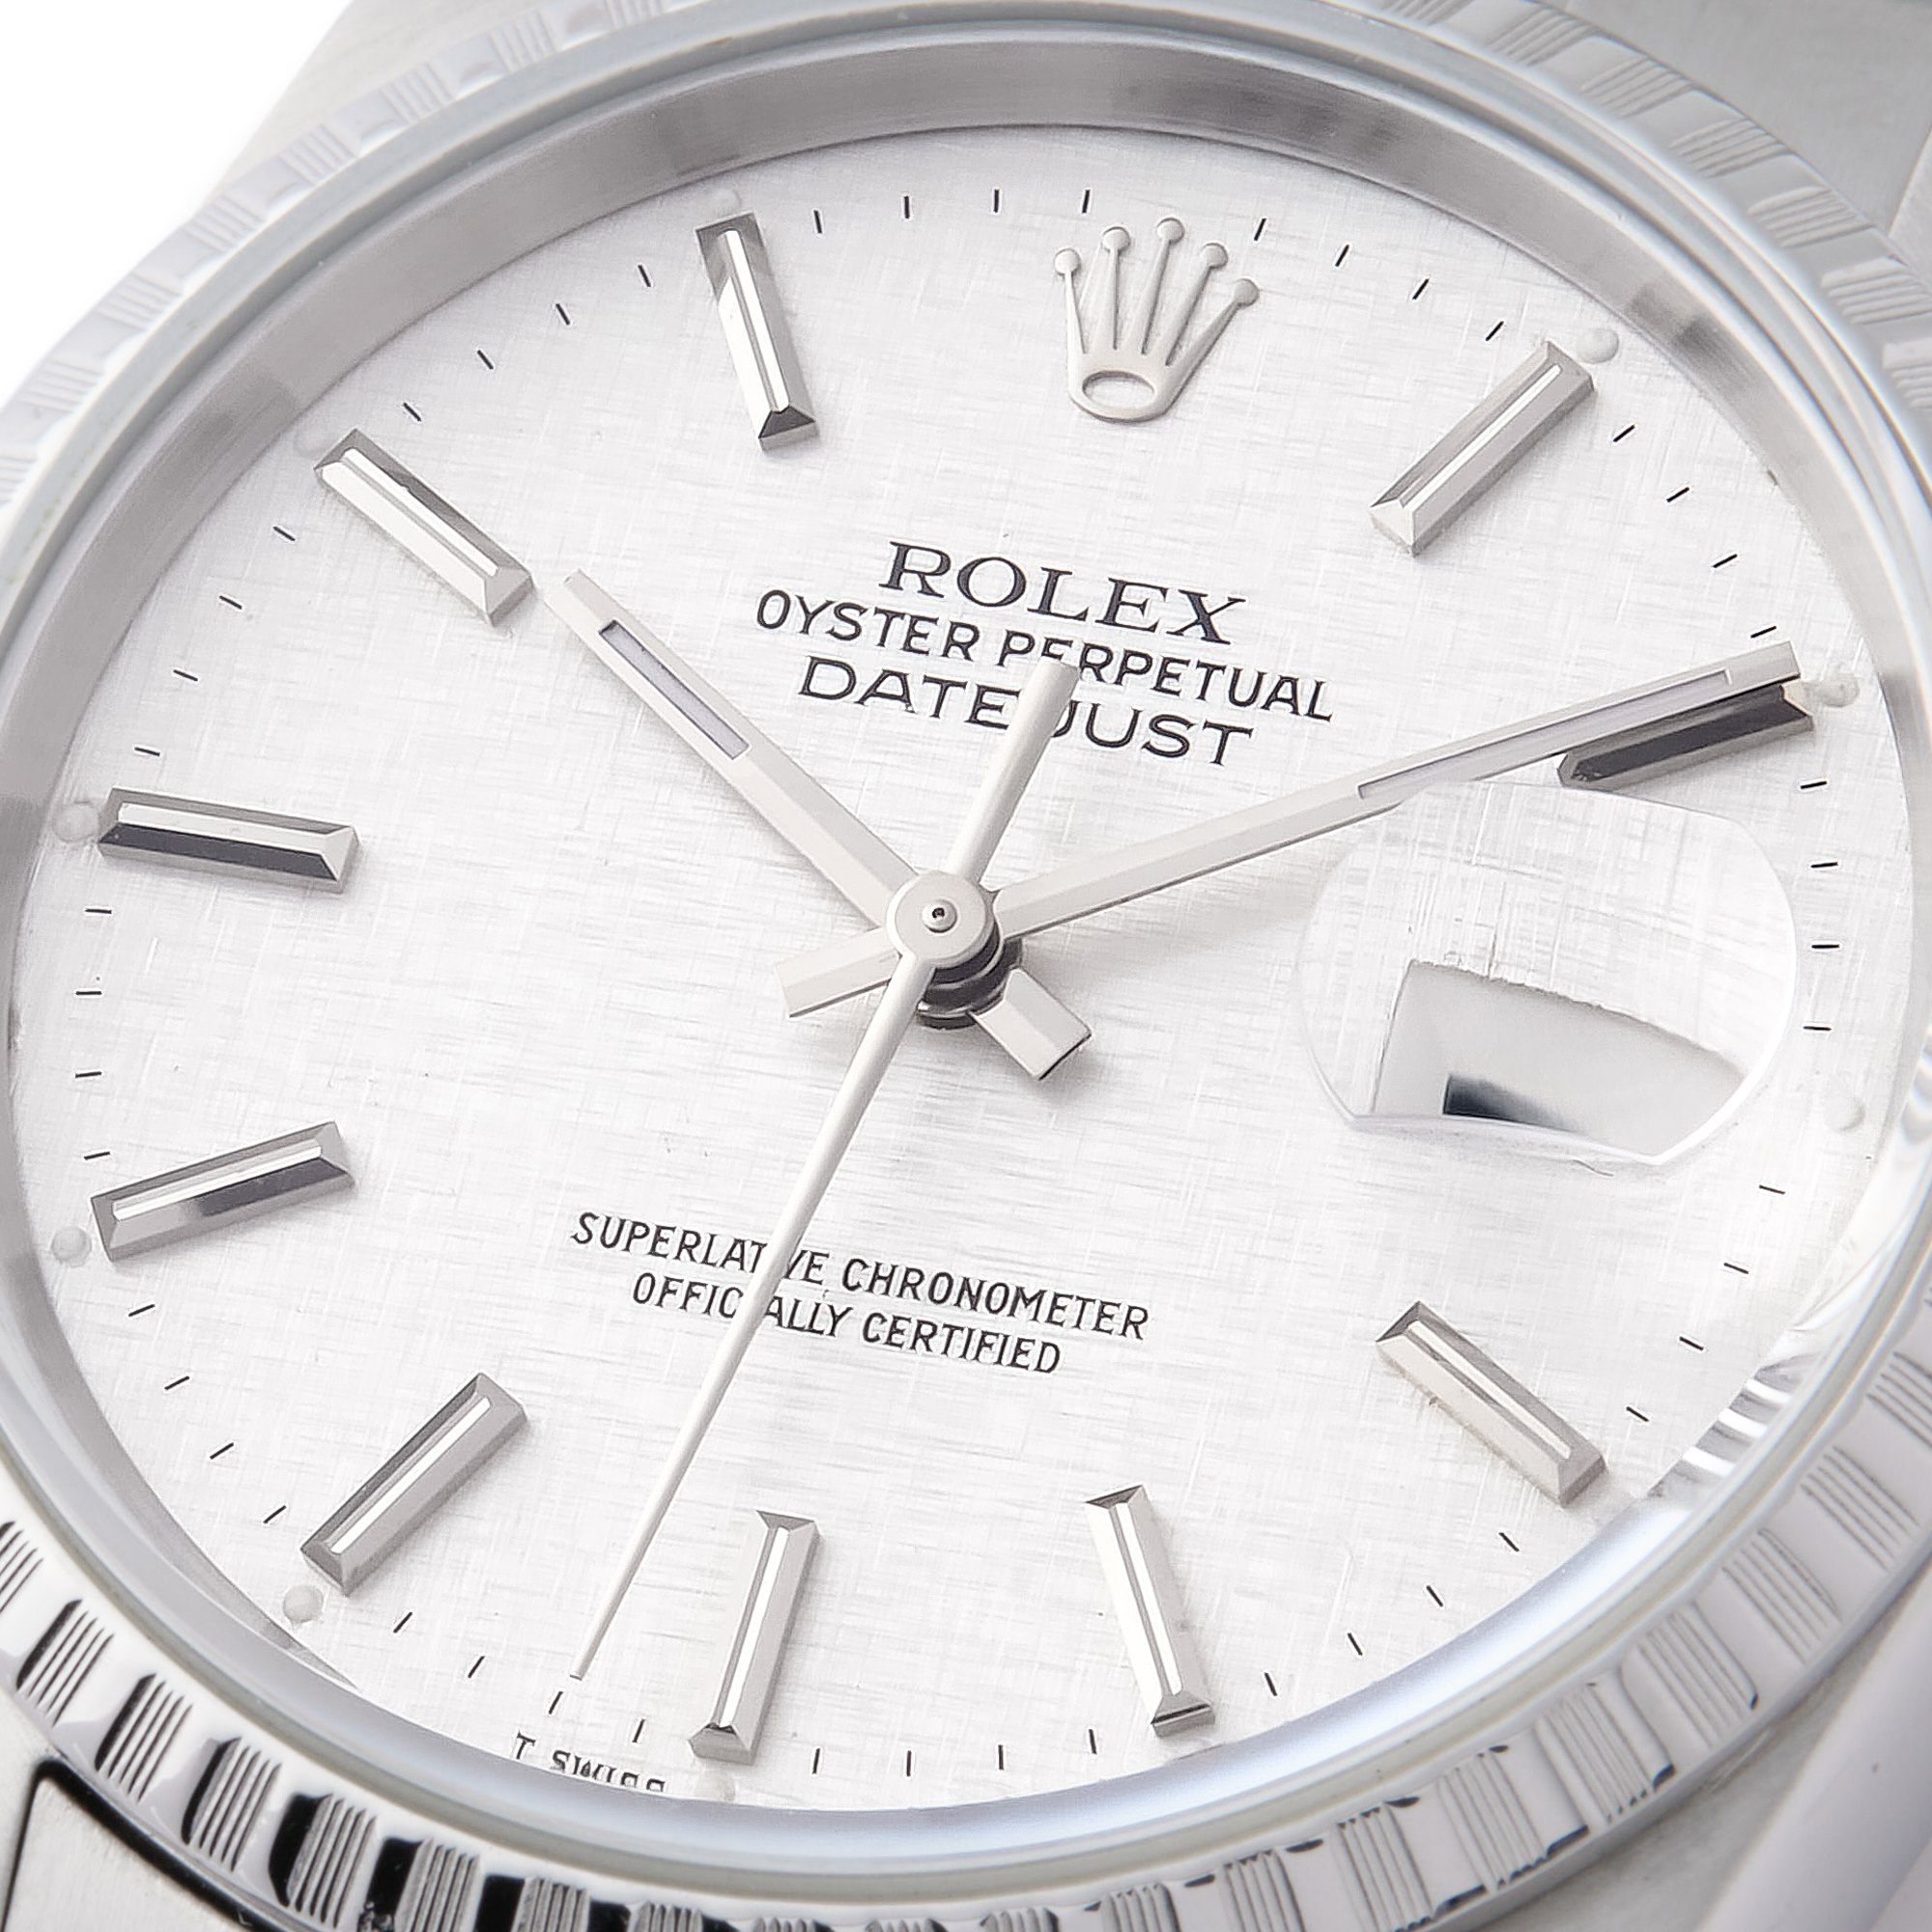 Rolex Datejust Roestvrij Staal 16220